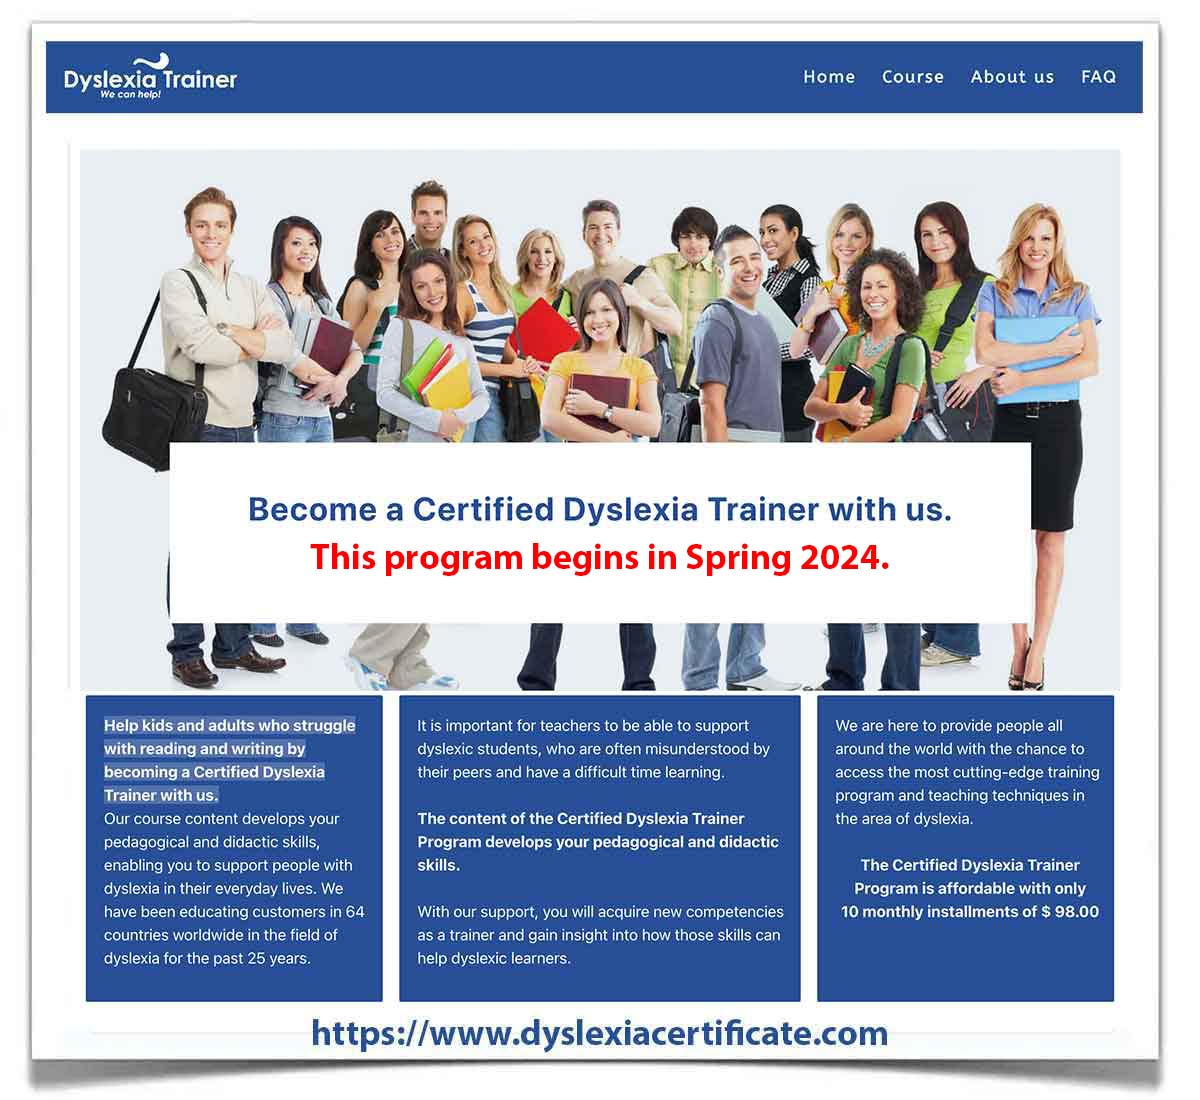 Help kids and adults who struggle with reading and writing by becoming a Certified Dyslexia Trainer with us.